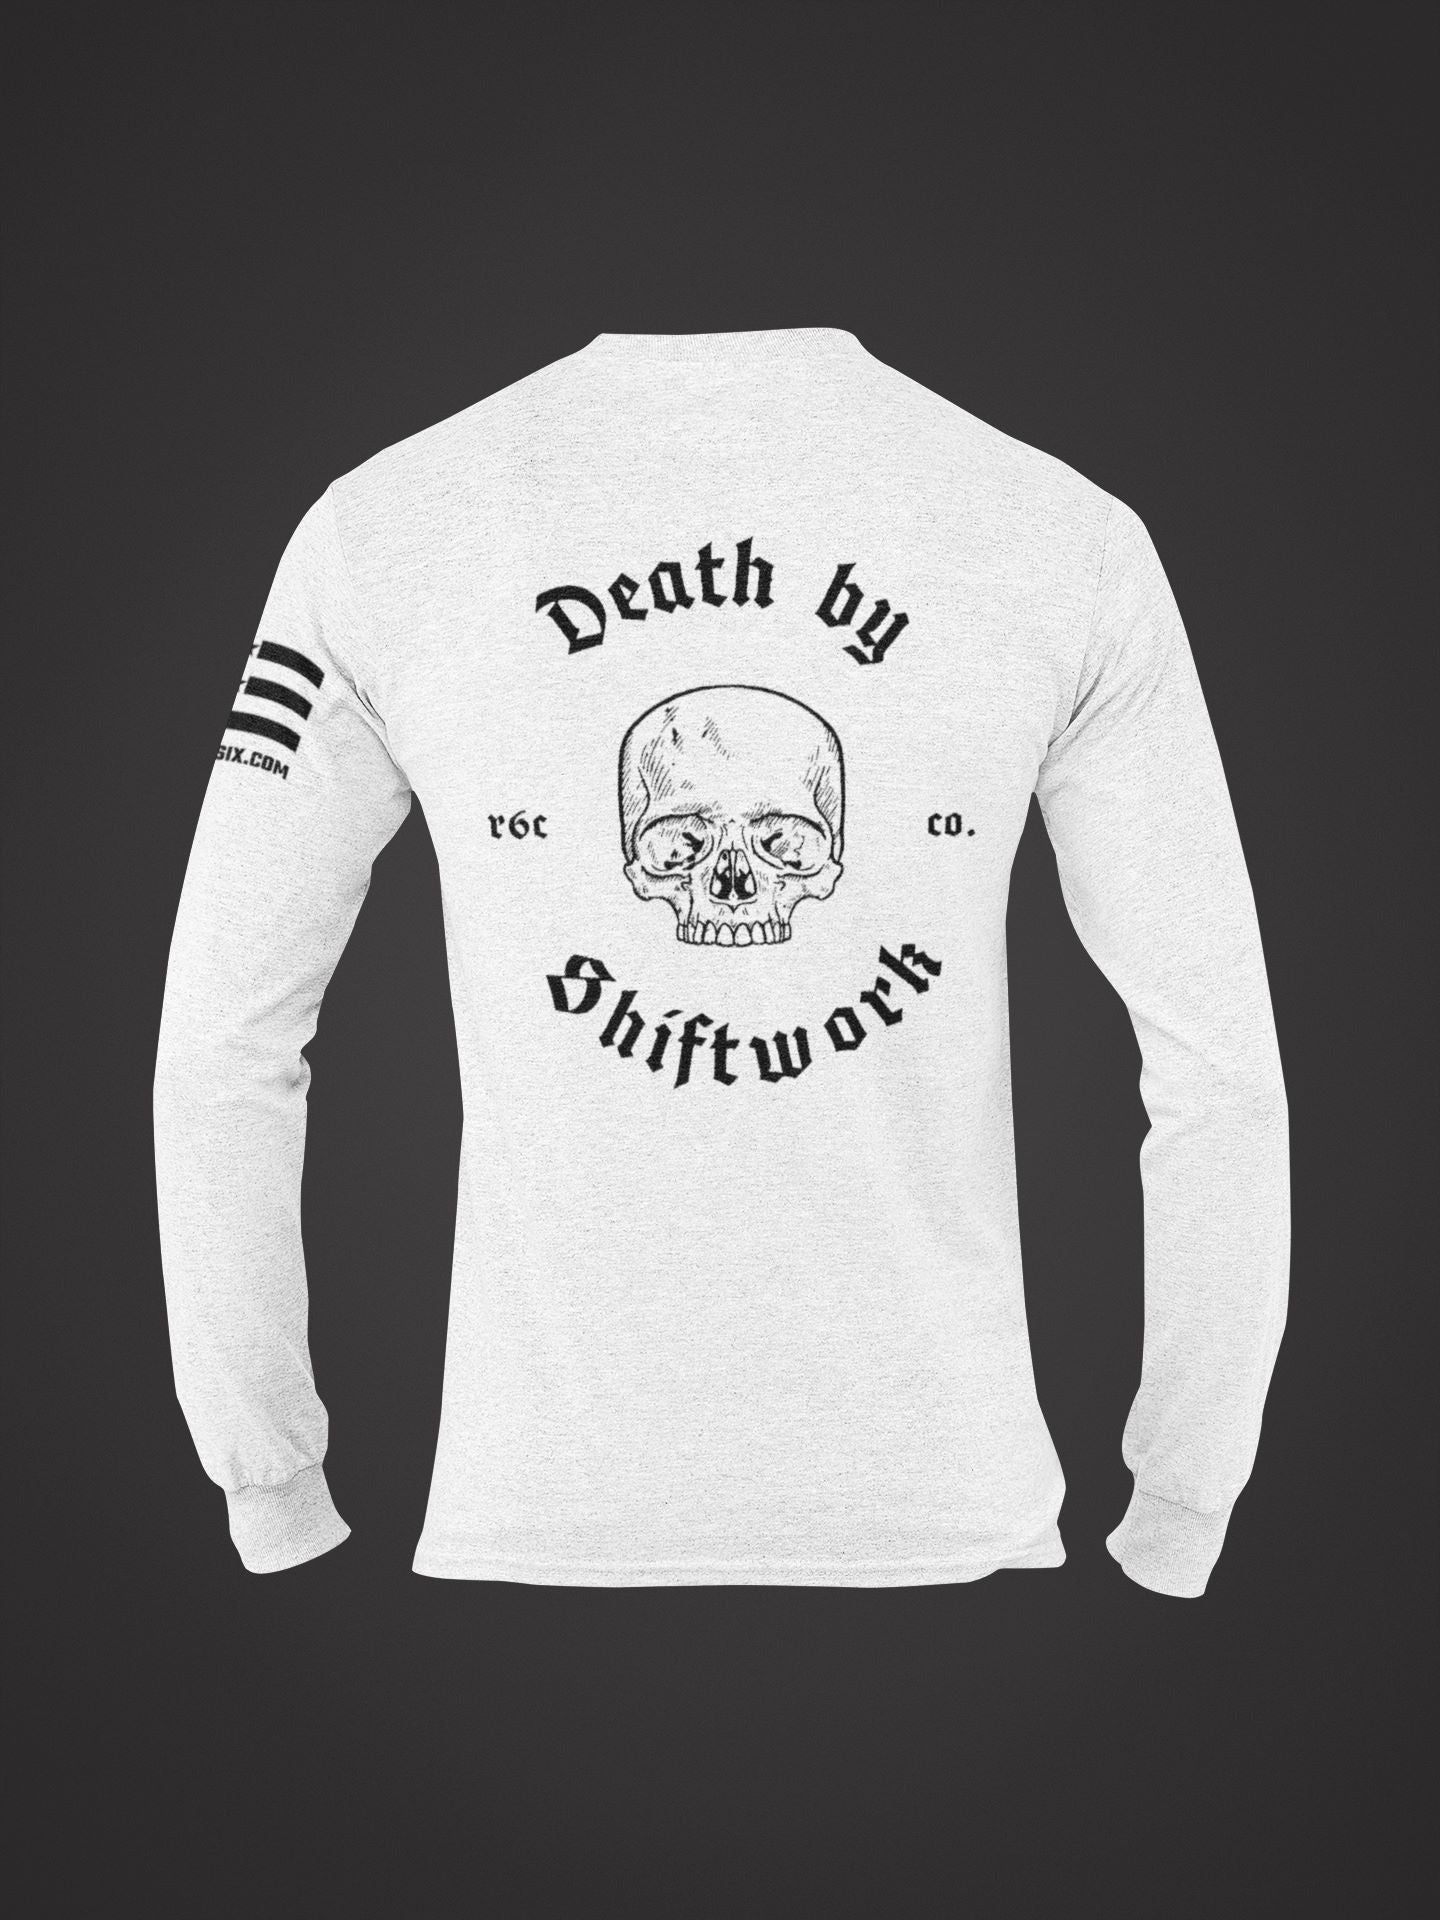 Death by Shiftwork Long Sleeve